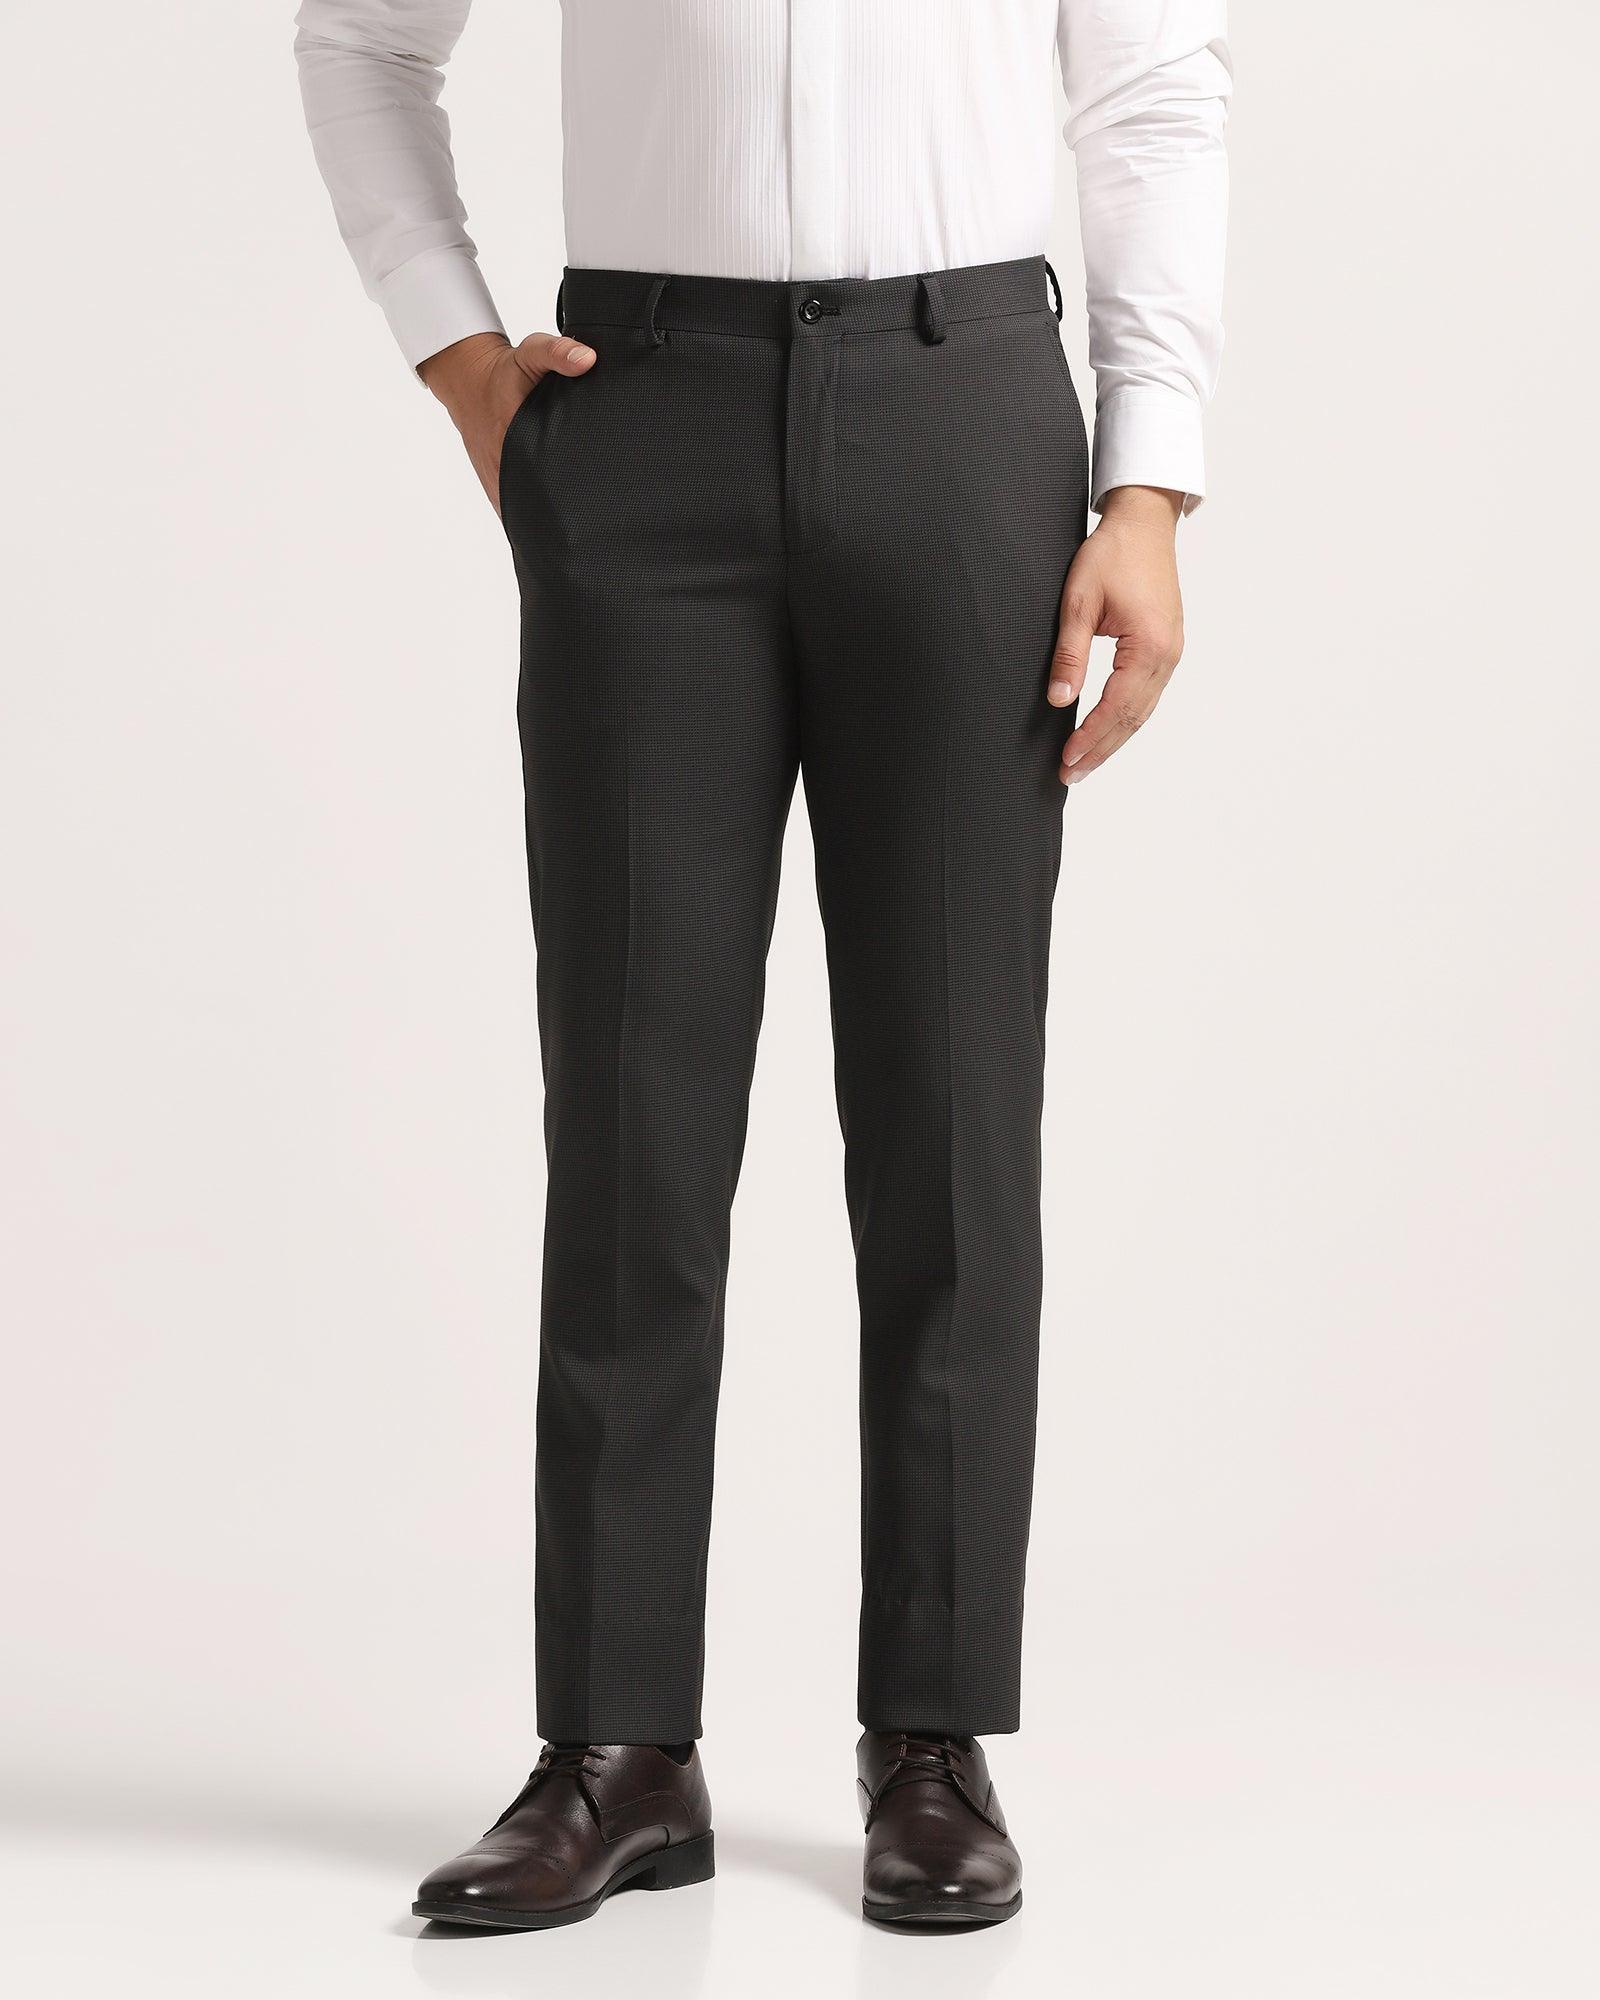 Buy Textured Slim Fit Formal Pants with Pockets